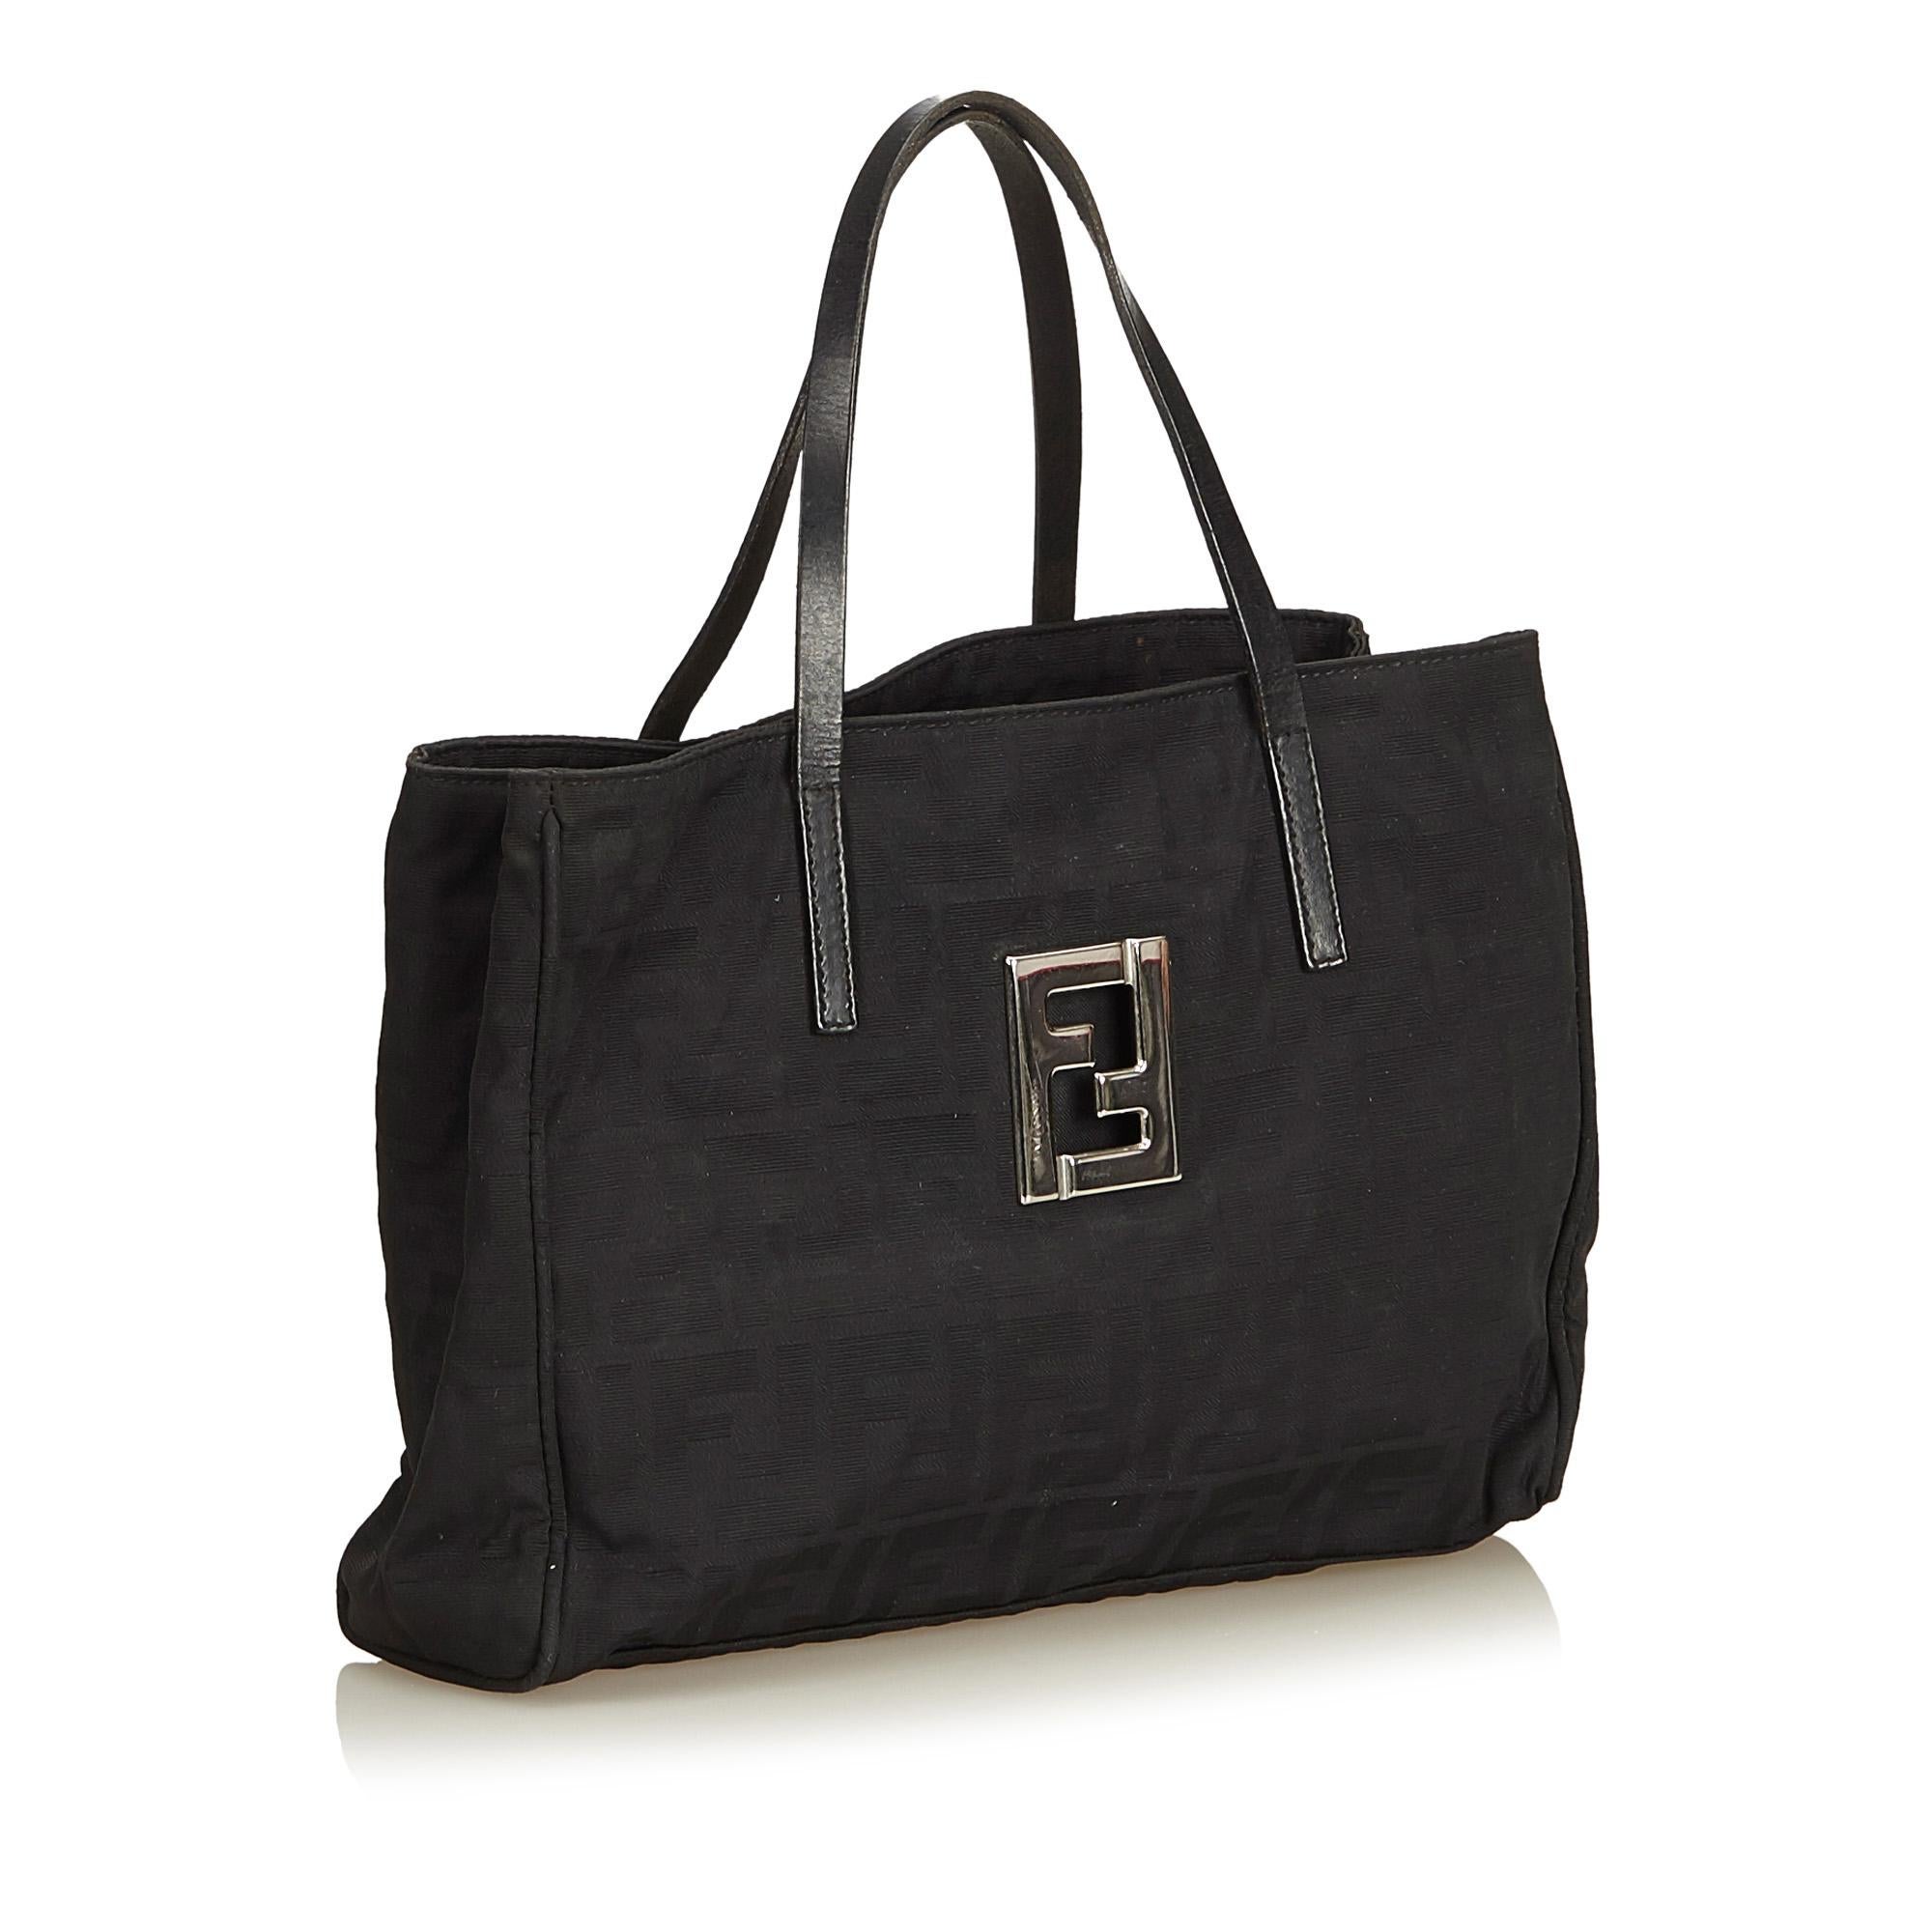 This tote bag features a canvas body, flat leather straps, open top and interior zip compartment and zip pocket. It carries as B+ condition rating.

Inclusions: 
This item does not come with inclusions.

Dimensions:
Length: 19.00 cm
Width: 26.00